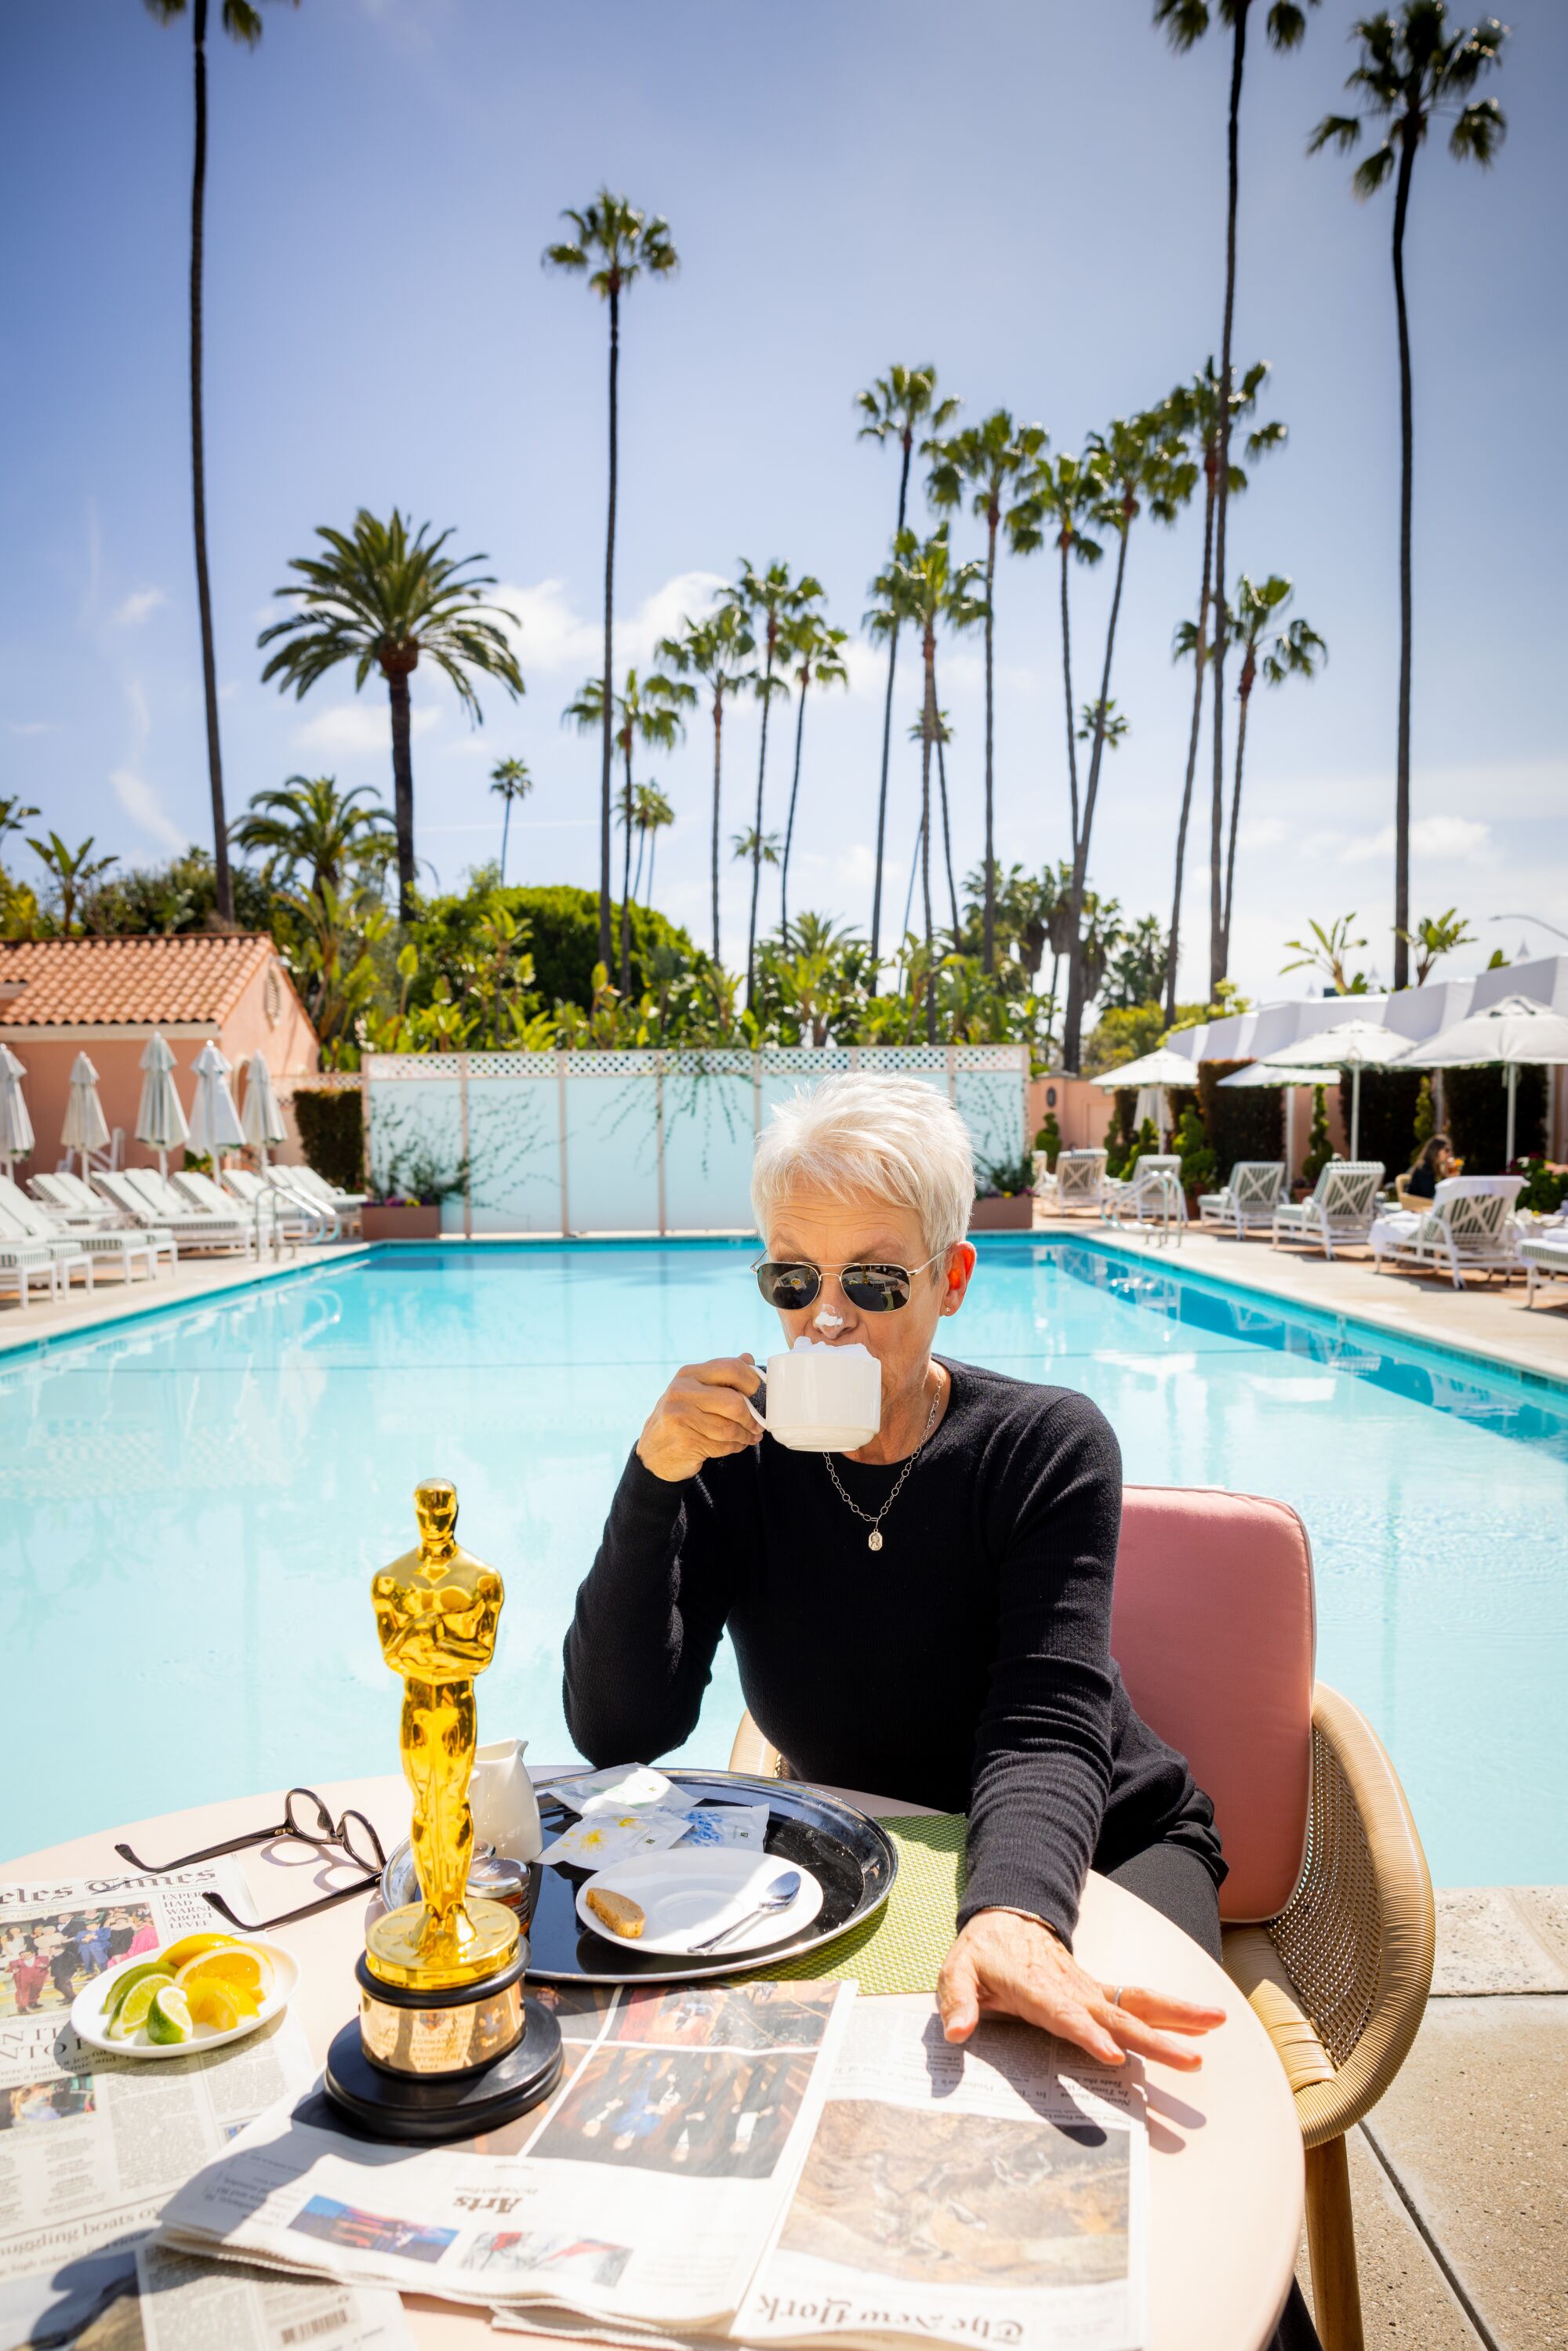 A woman in sunglasses sips from a cup, with her Oscar at her side and a dab of latte foam on her nose.